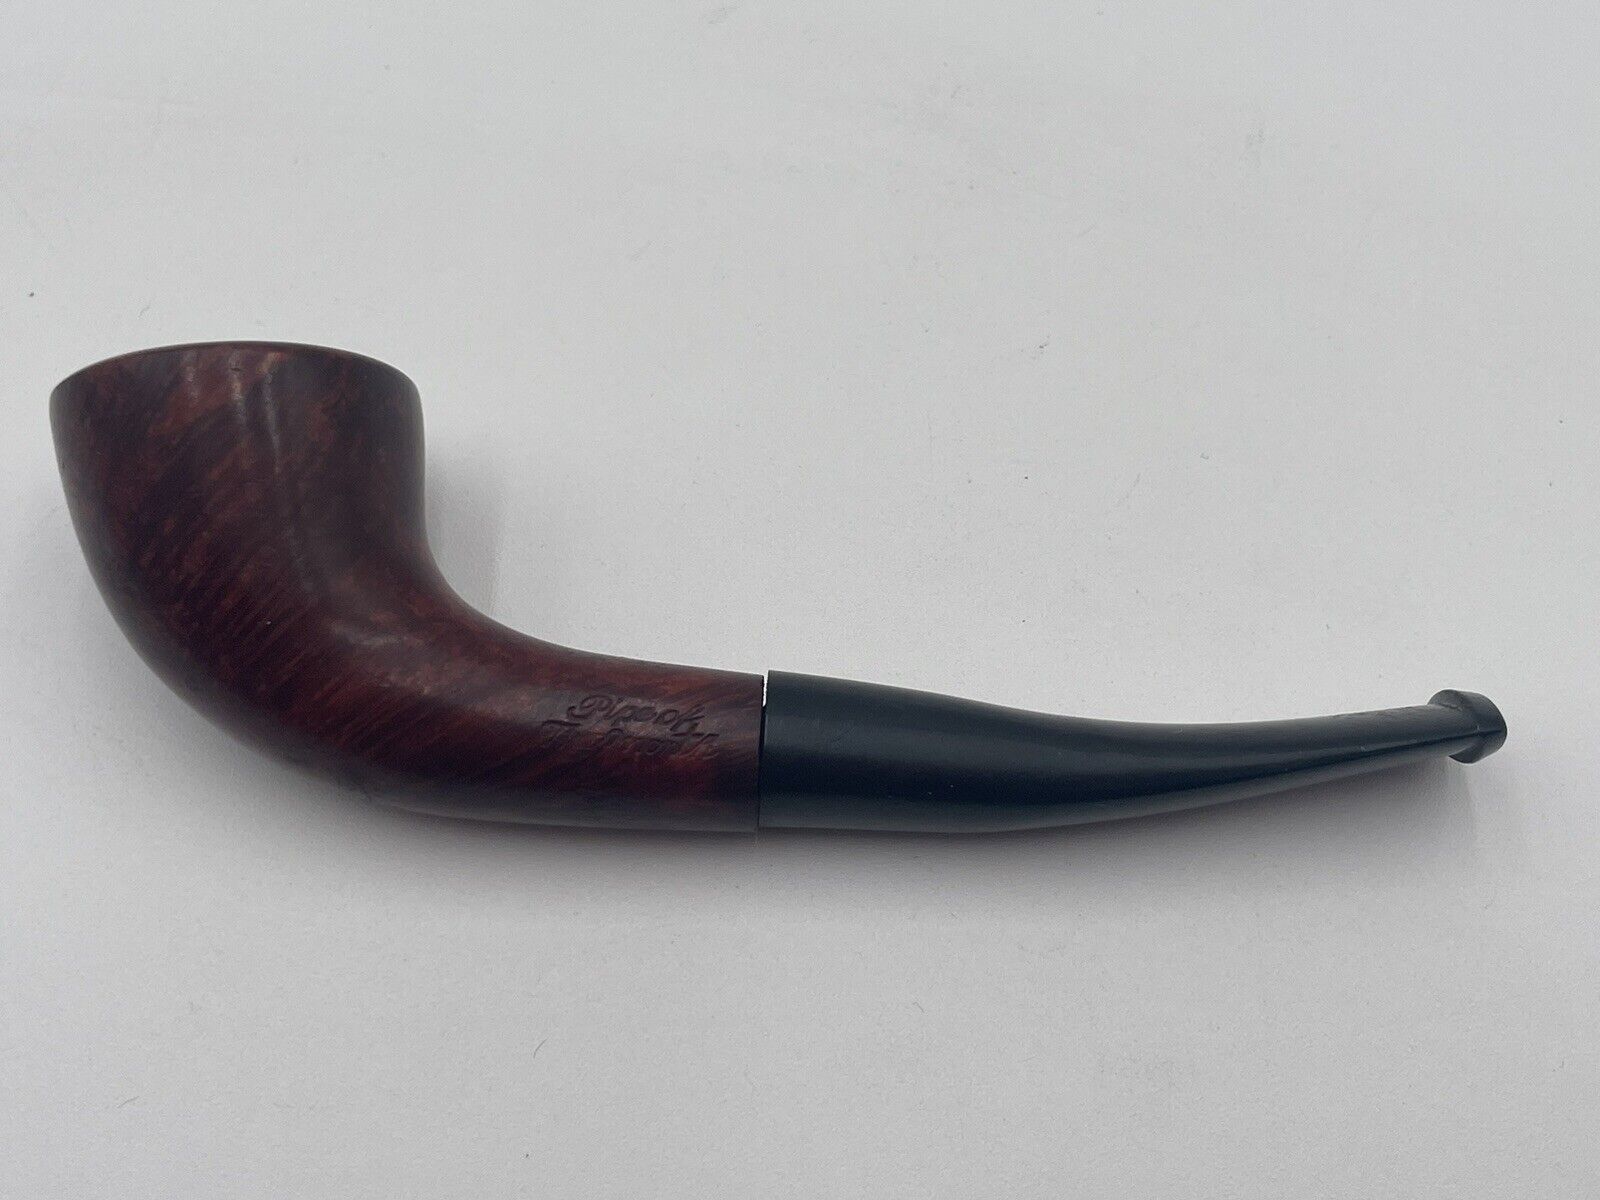 WALLY FRANK LTD “Pipe Of The Month” SMOKING PIPE